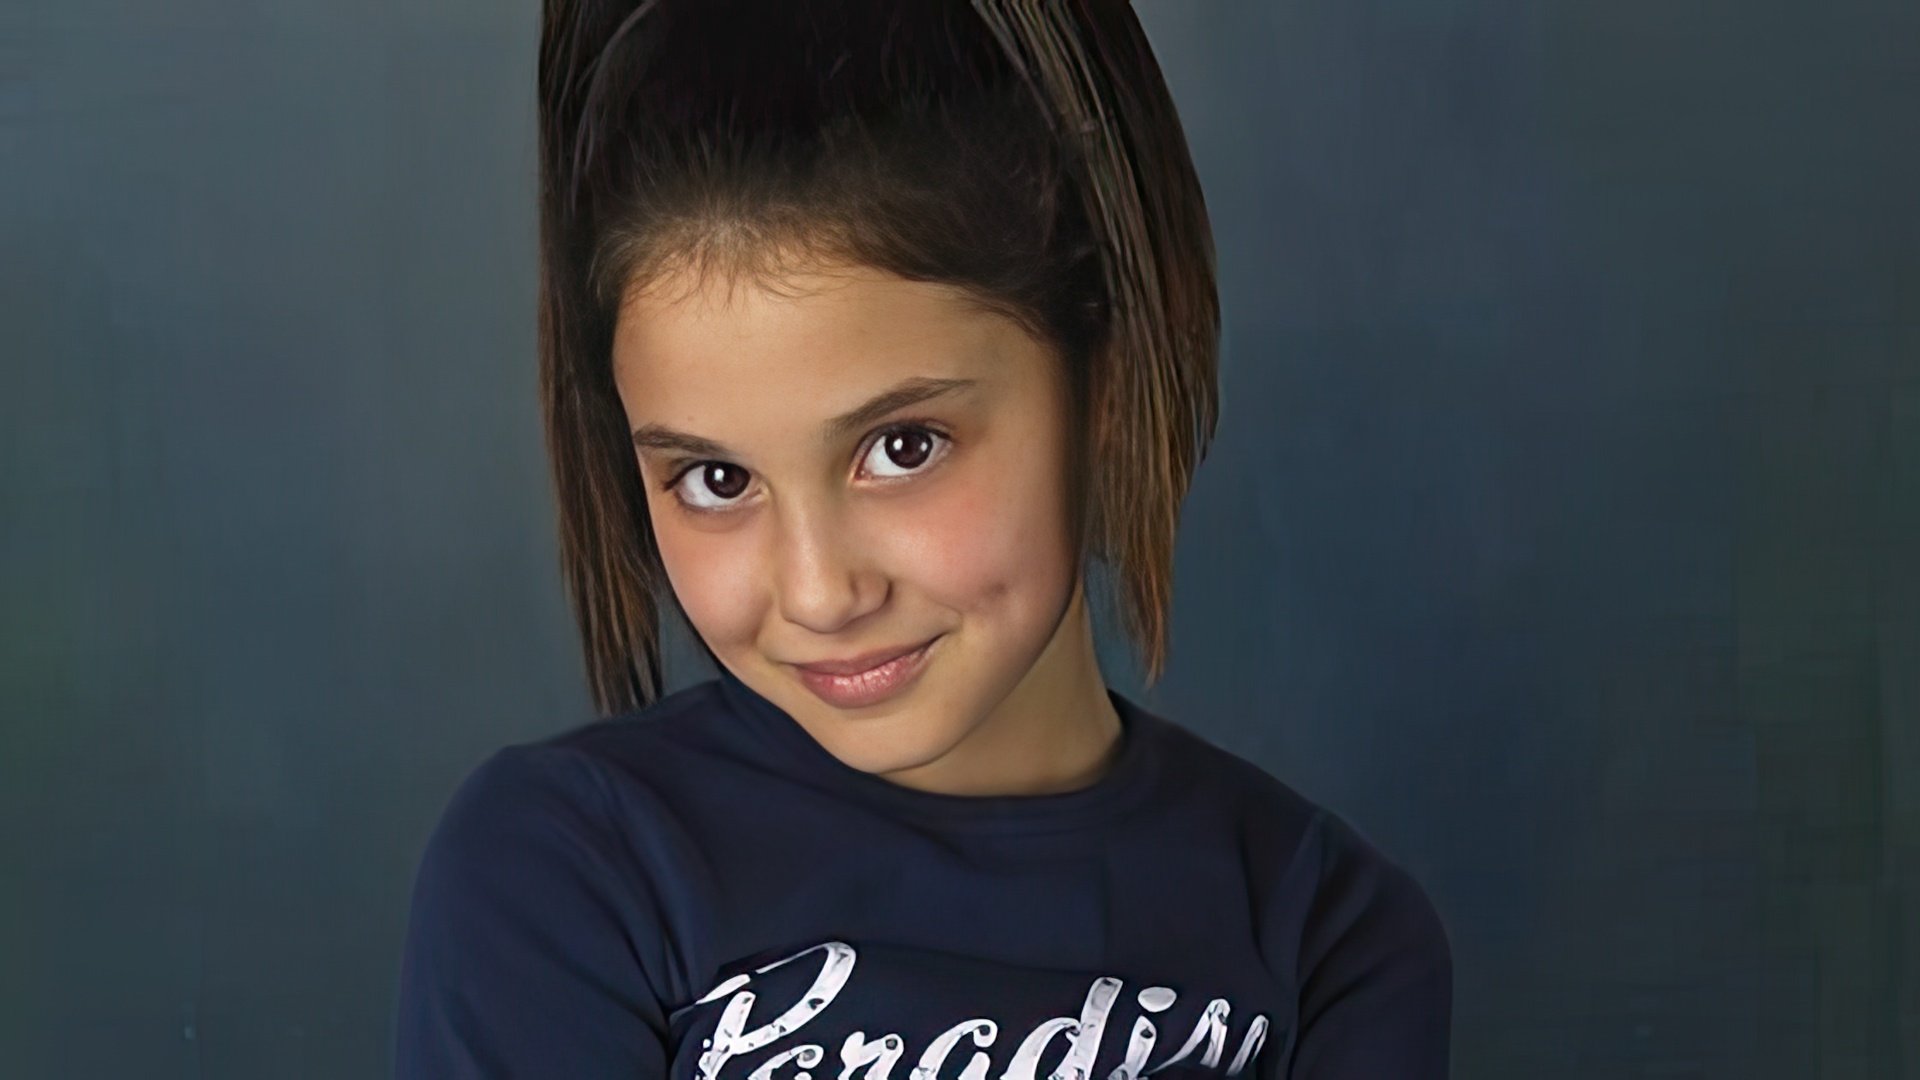 At the age of 13, Ariana Grande seriously contemplated a career in music